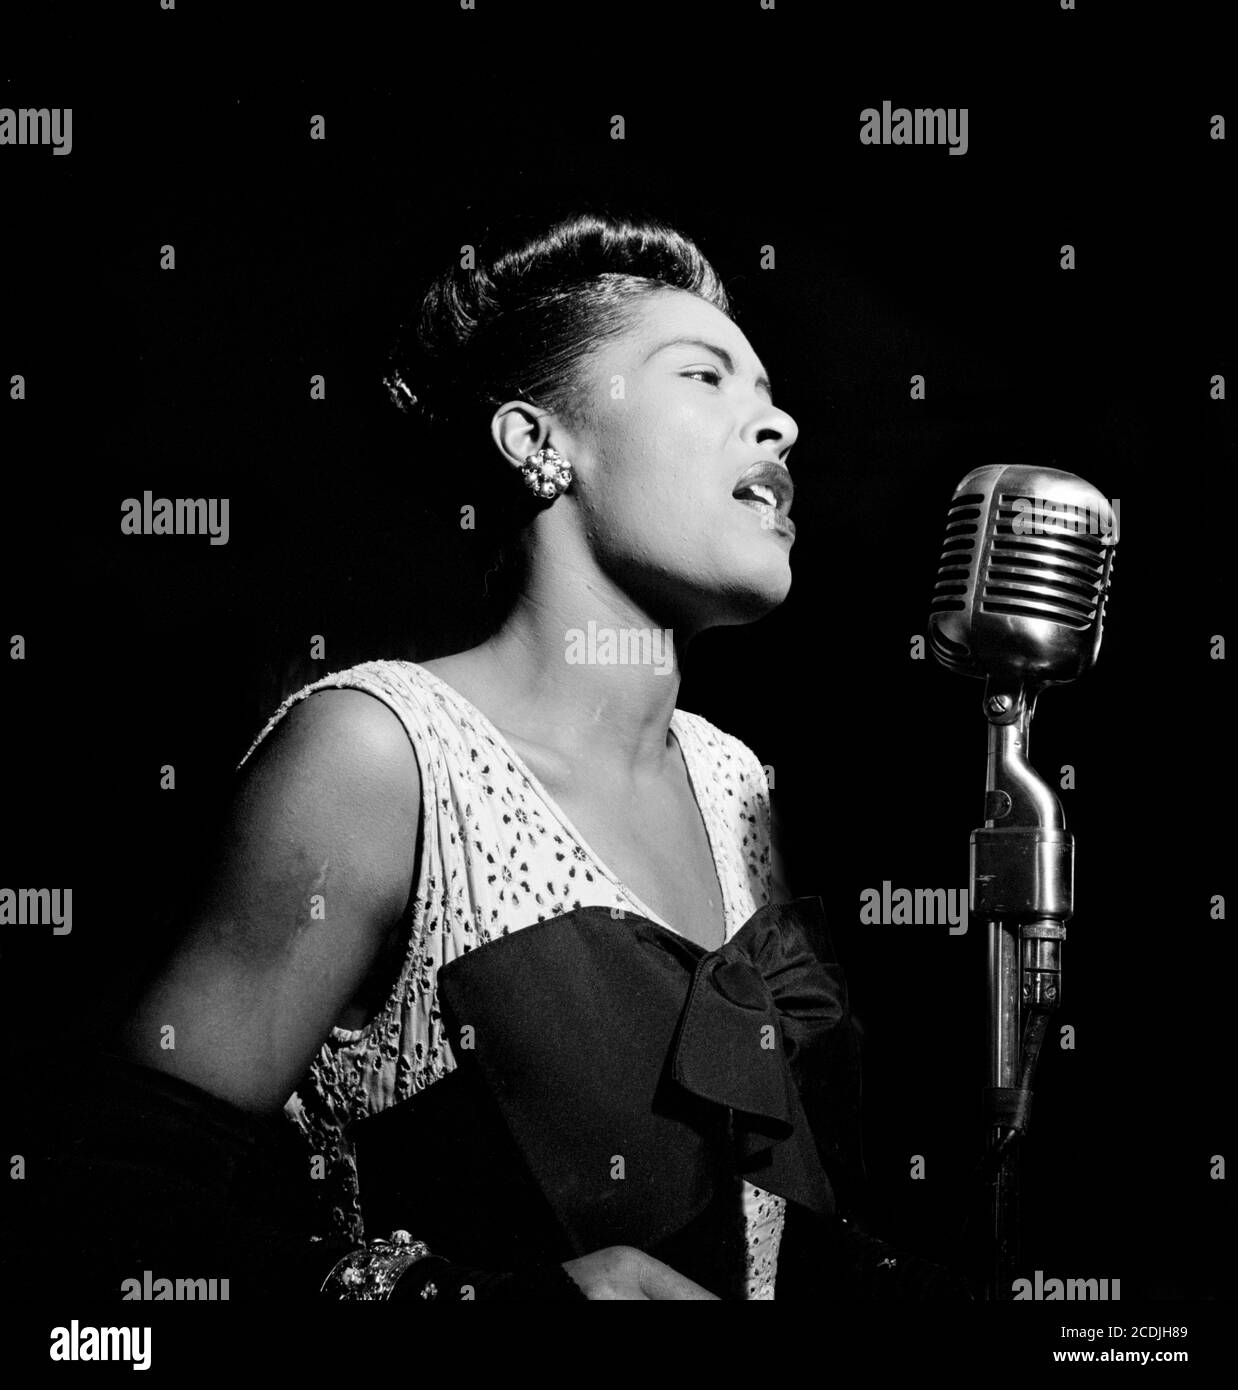 Billie Holiday. Portrait of the American jazz singer Billie Holiday (1915-1959 ) at Downbeat, New York, c.1947 Stock Photo